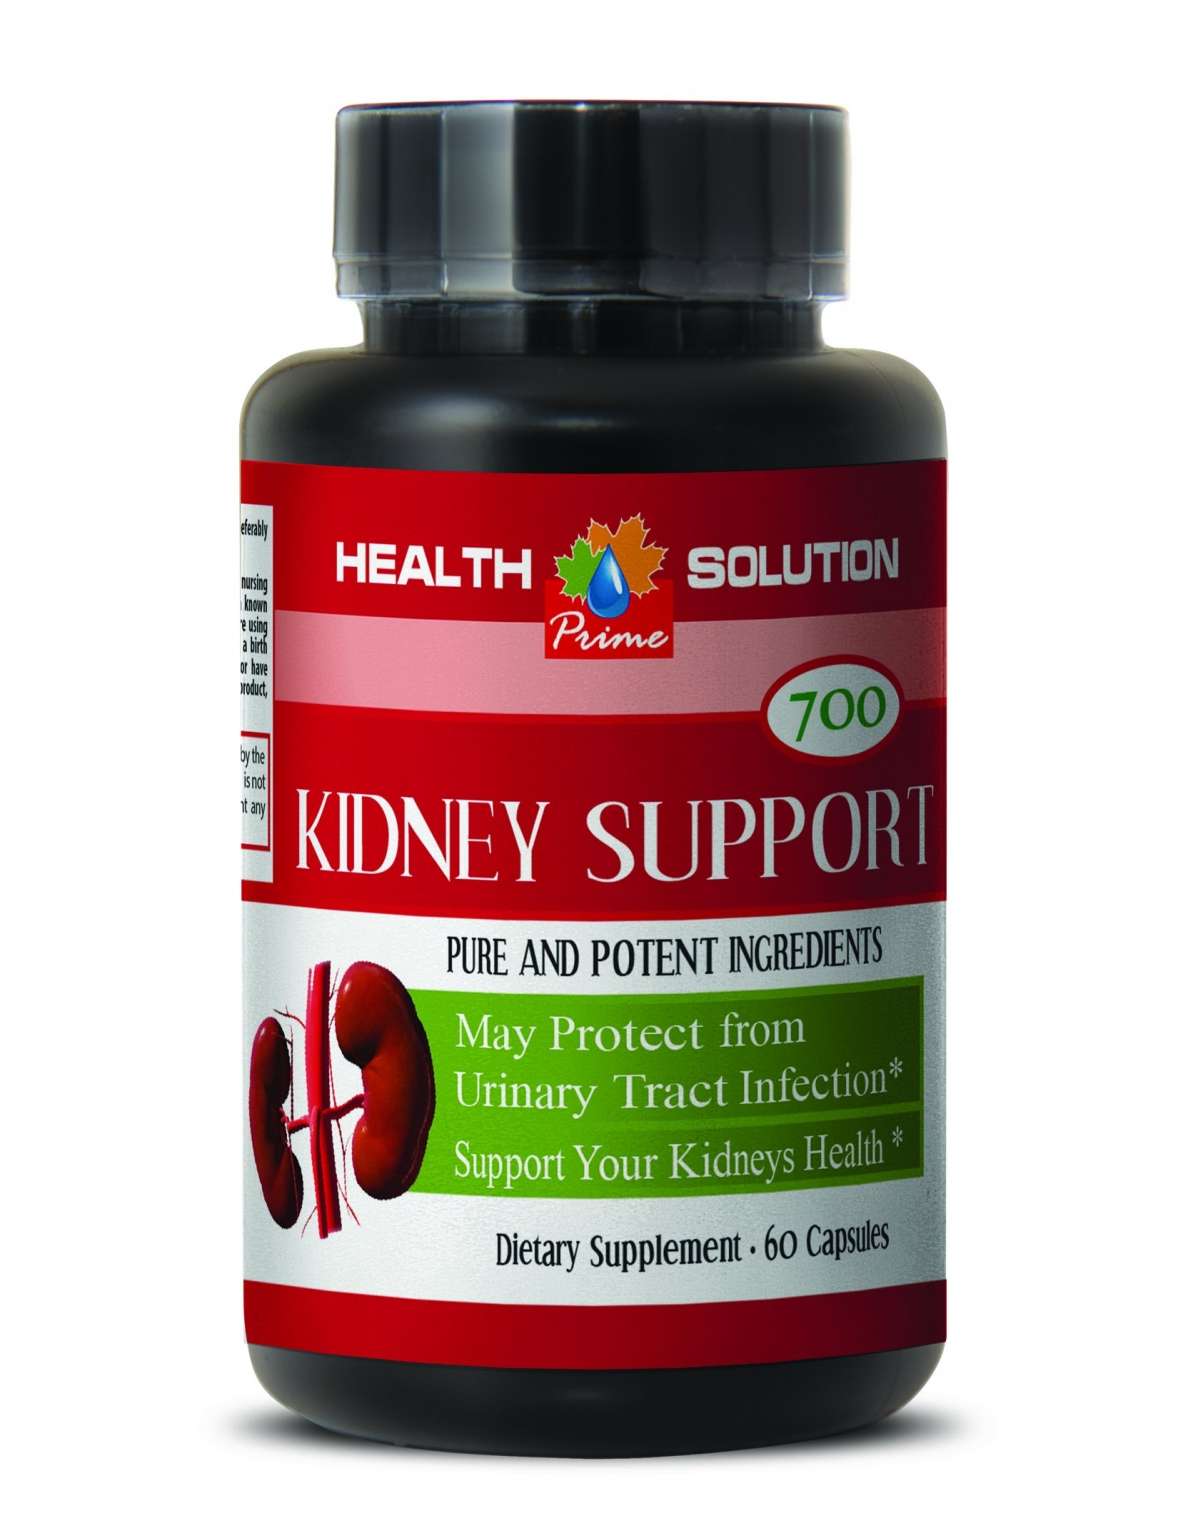 Immune Support Booster  Kidney Support 700  Cranberry Supplements  1 ...